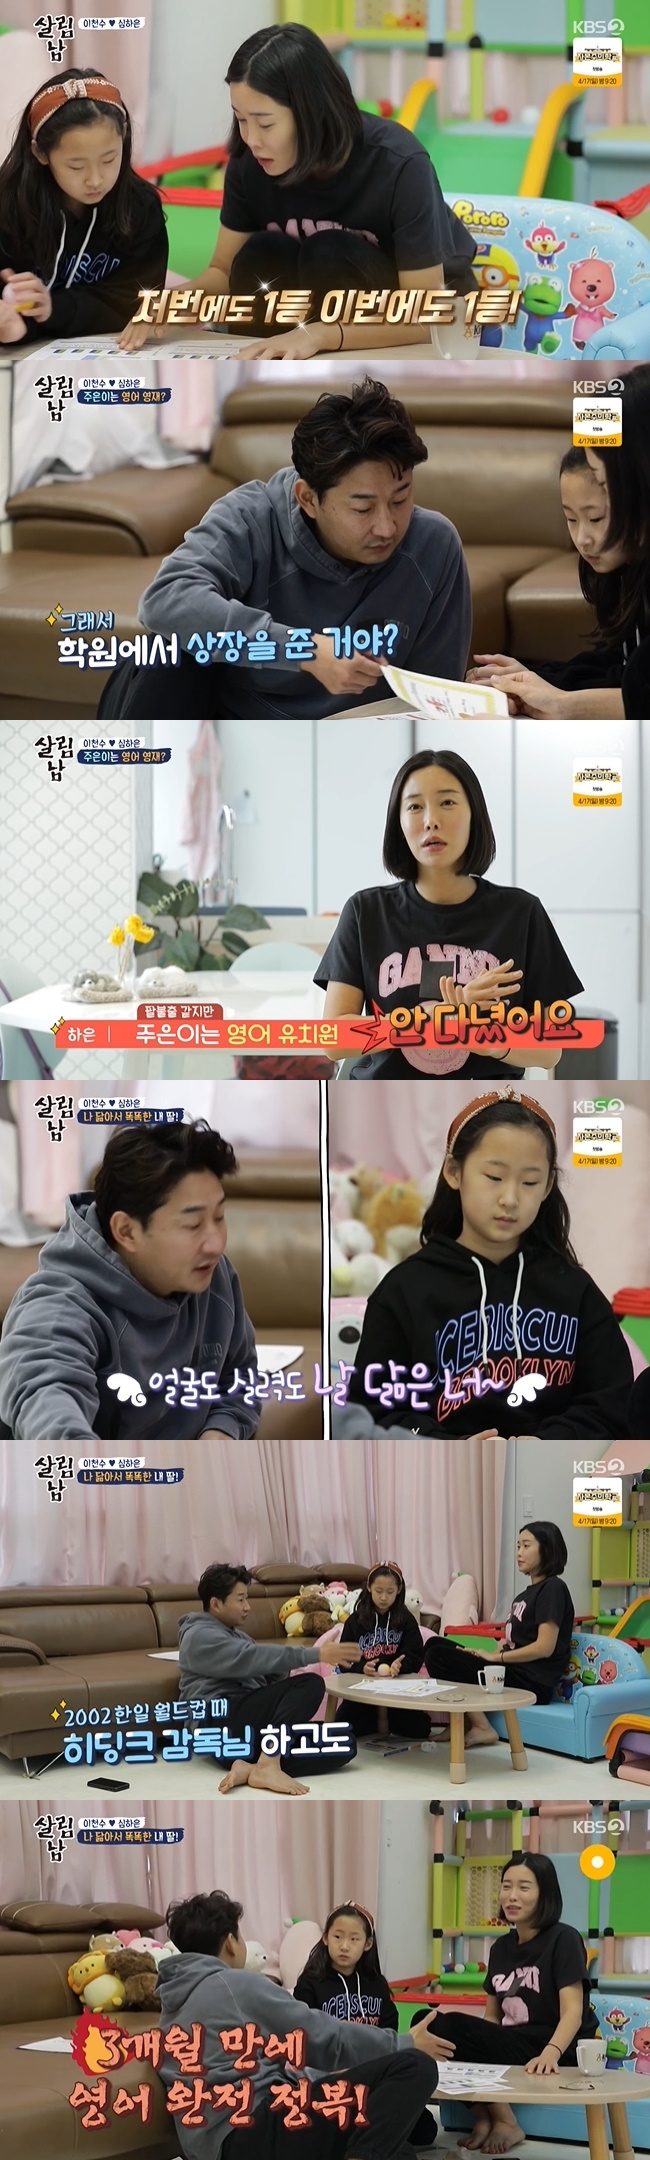 Lee Chun-soo, Shim Ha-eun couple waged stake war in front of English-speaking Lee Ju-eunOn KBS 2TVs Season 2 of Living Men, which aired on April 9, Lee Chun-soo and Shim Ha-eun were proud of their daughter Lee Ju-eun, who won the first English test at the institute.In the living room, Shim Ha-eun said, I did an English test at the institute, but I won first place last time, but I also got first place again.Lee Ju-eun was listed on good grades. Shim Ha-eun said, Judge did not often attend English kindergarten.Ive been in the academy for a year now, and Ive been on the top of my English report card ever since.I look like myself, said Lee Chun-soo, who was delighted. I was a football gifted man. Youre not just the same face as your father, but the same.Shim Ha-eun and Lee Chun-soo claimed that they had studied well in elementary school and that their daughter was good at English because of herself.Lee Chun-soo said, I am a report card on KBS. I was very greedy and I studied hard. Do you boast about me? I was like a family with Hiddink.Ive finished my English in three months, and when I was in middle school, I was almost ALL 100.